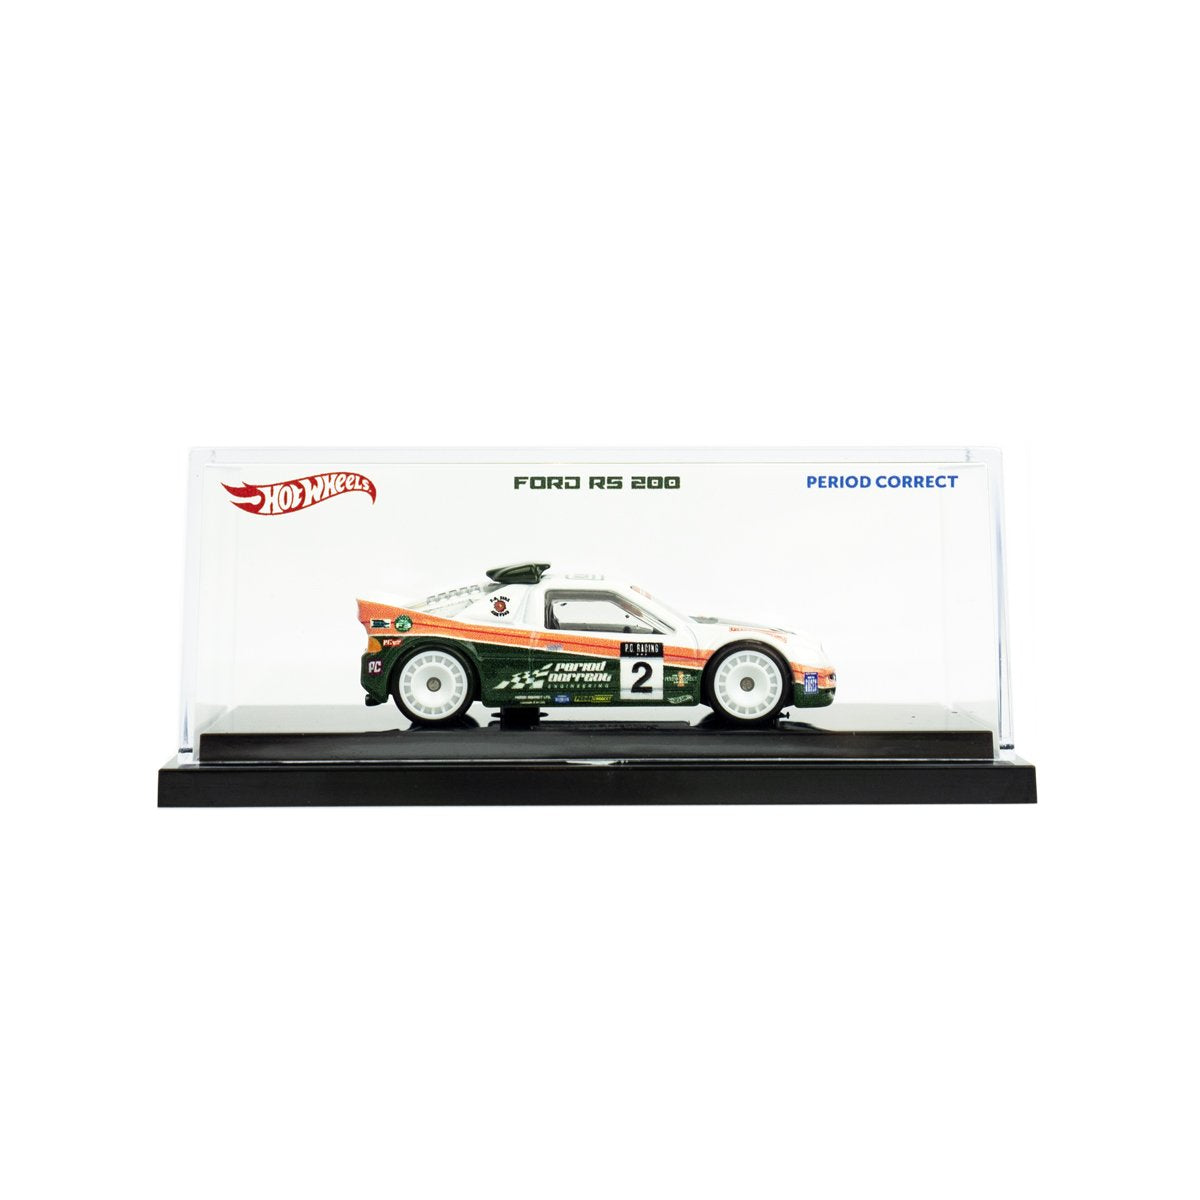 FORD RS200 1:64 DIE-CAST CAR